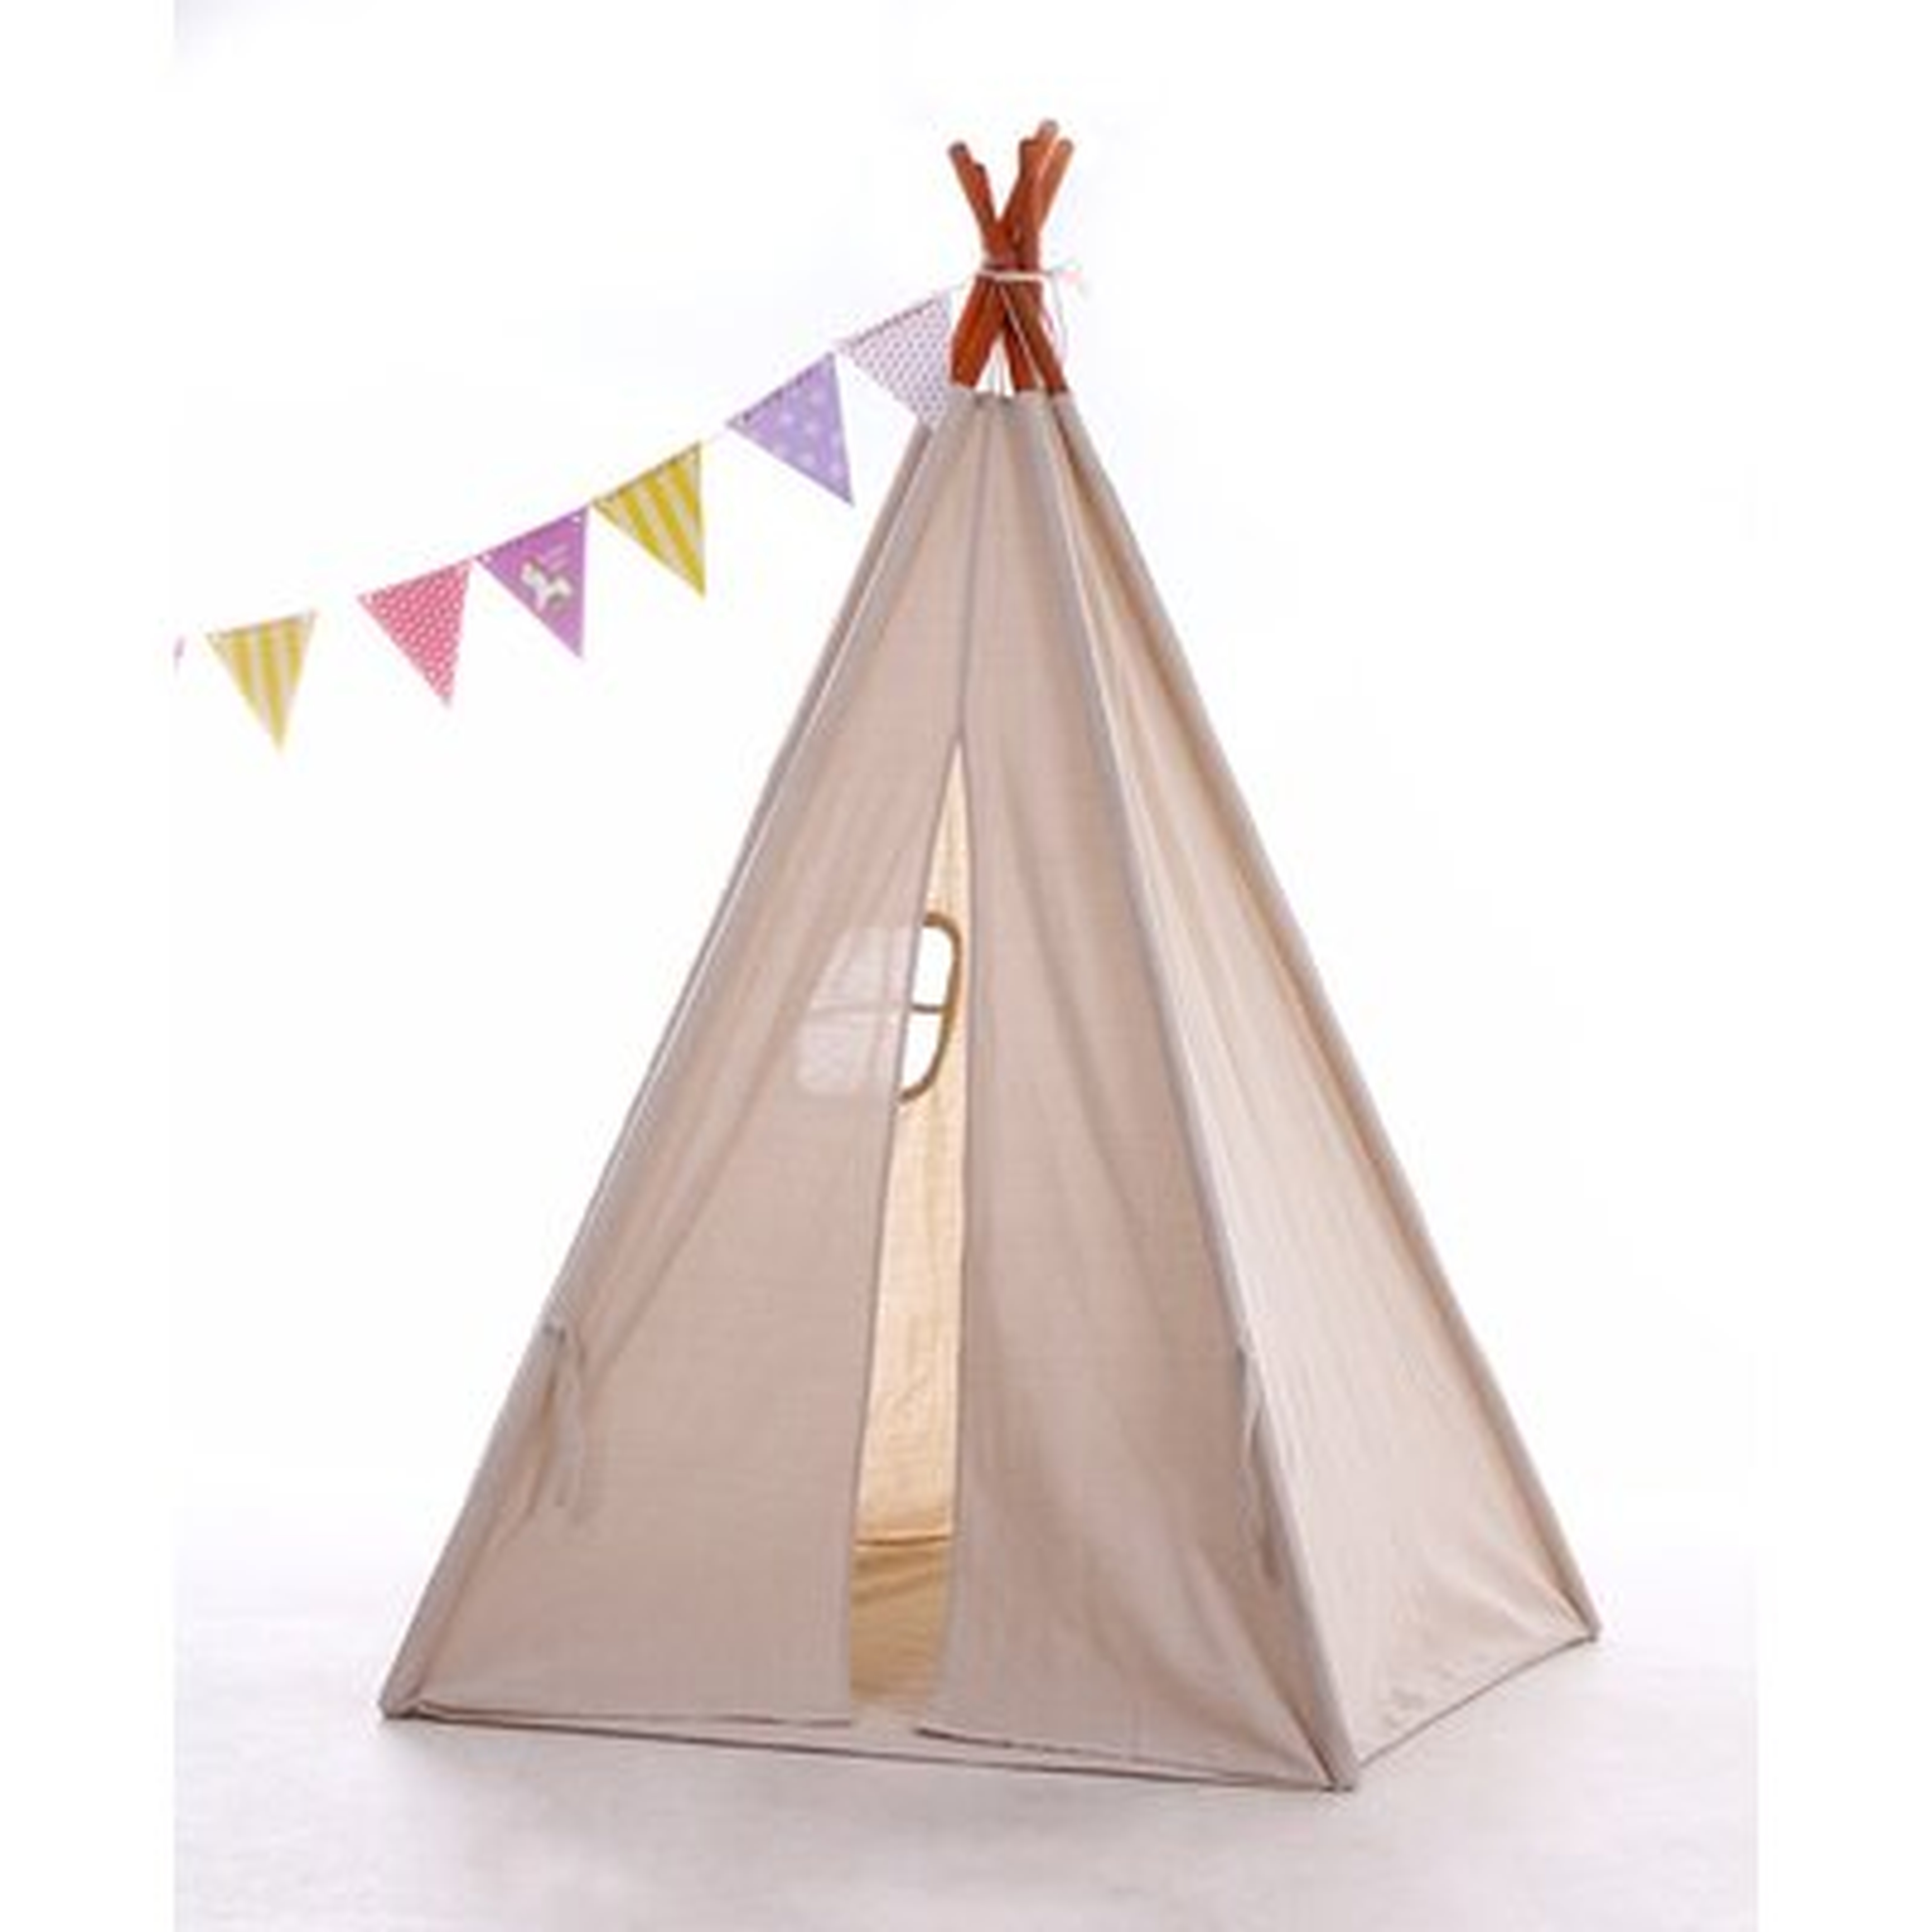 Play Teepee with Carrying Bag - Birch Lane